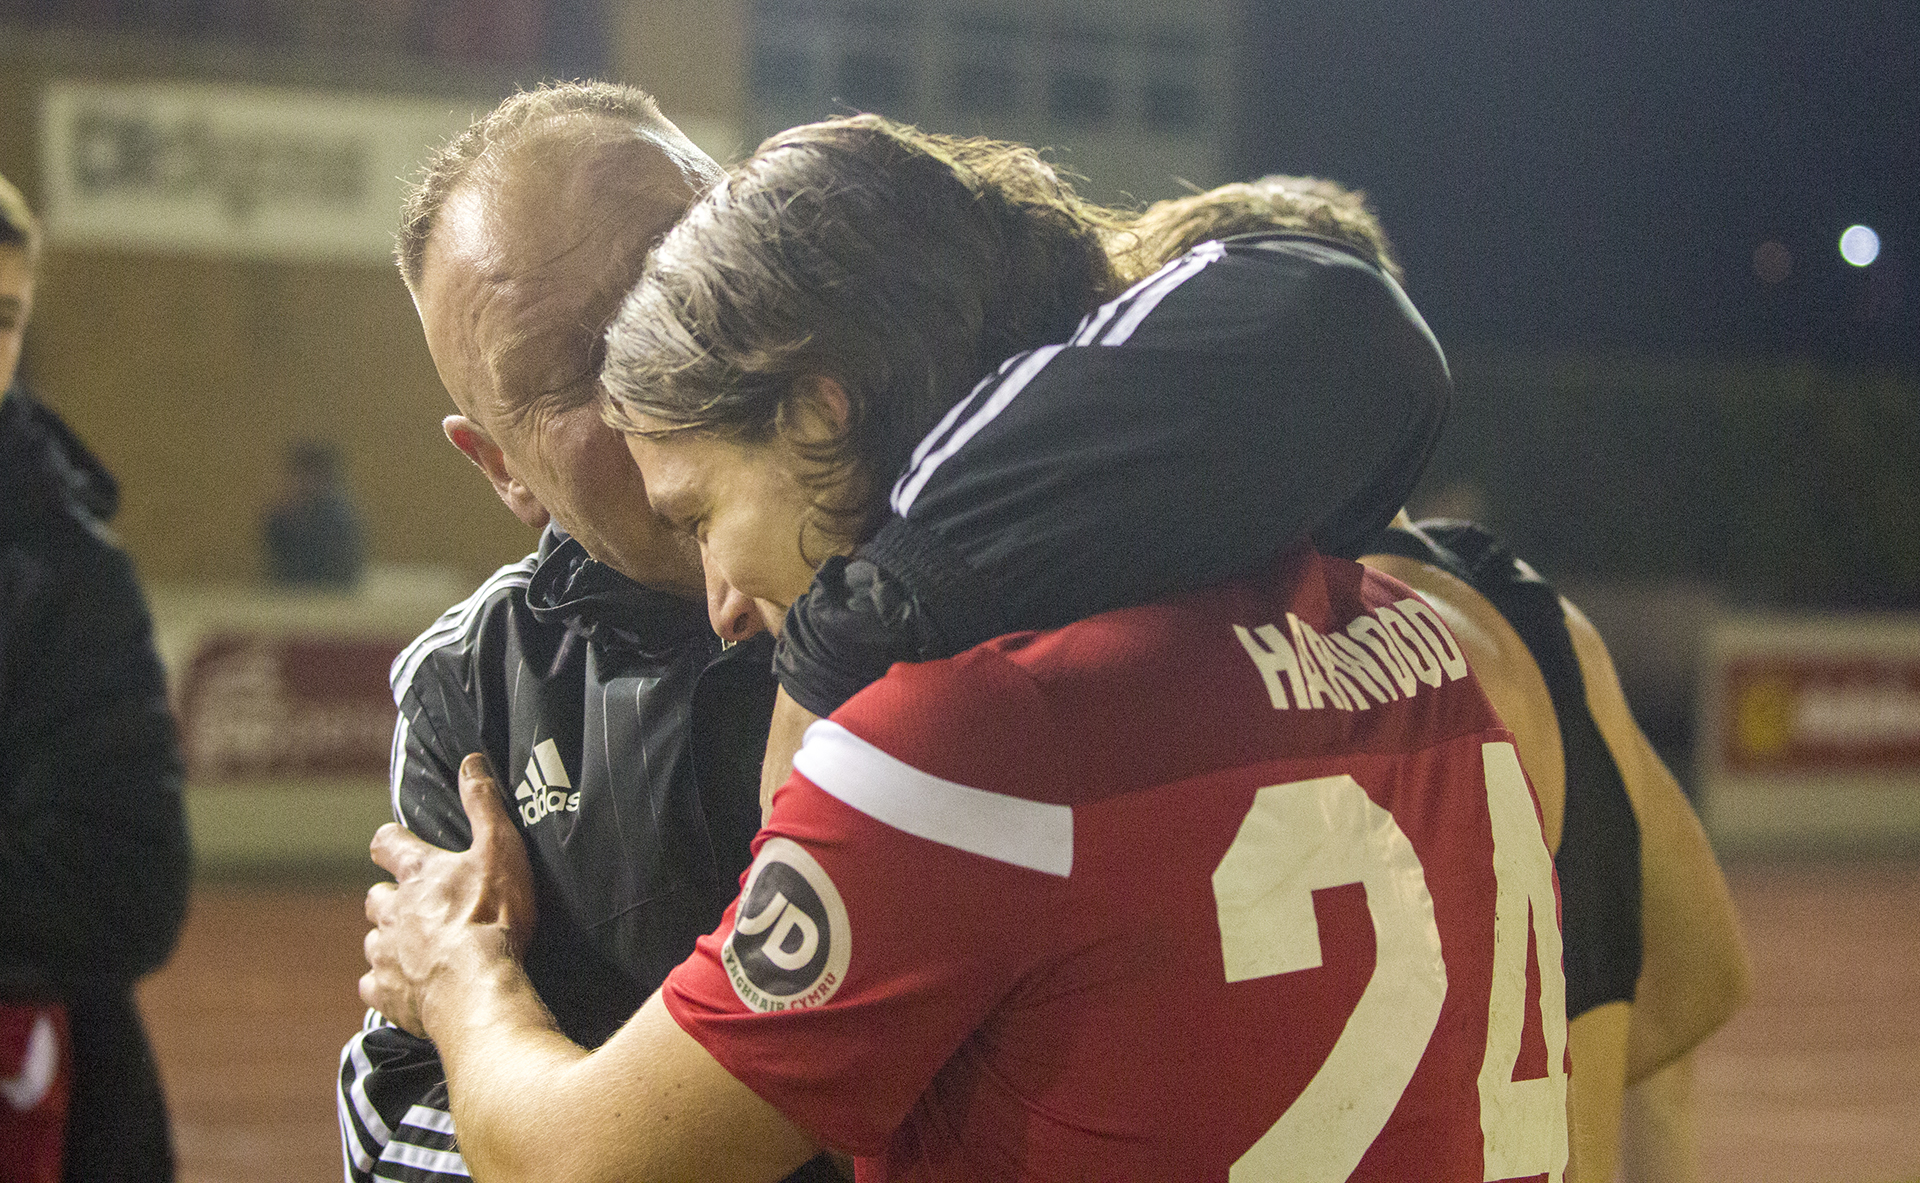 Andy Morrison embraces match-winner Conor Harwood at the full time whistle | © NCM Media